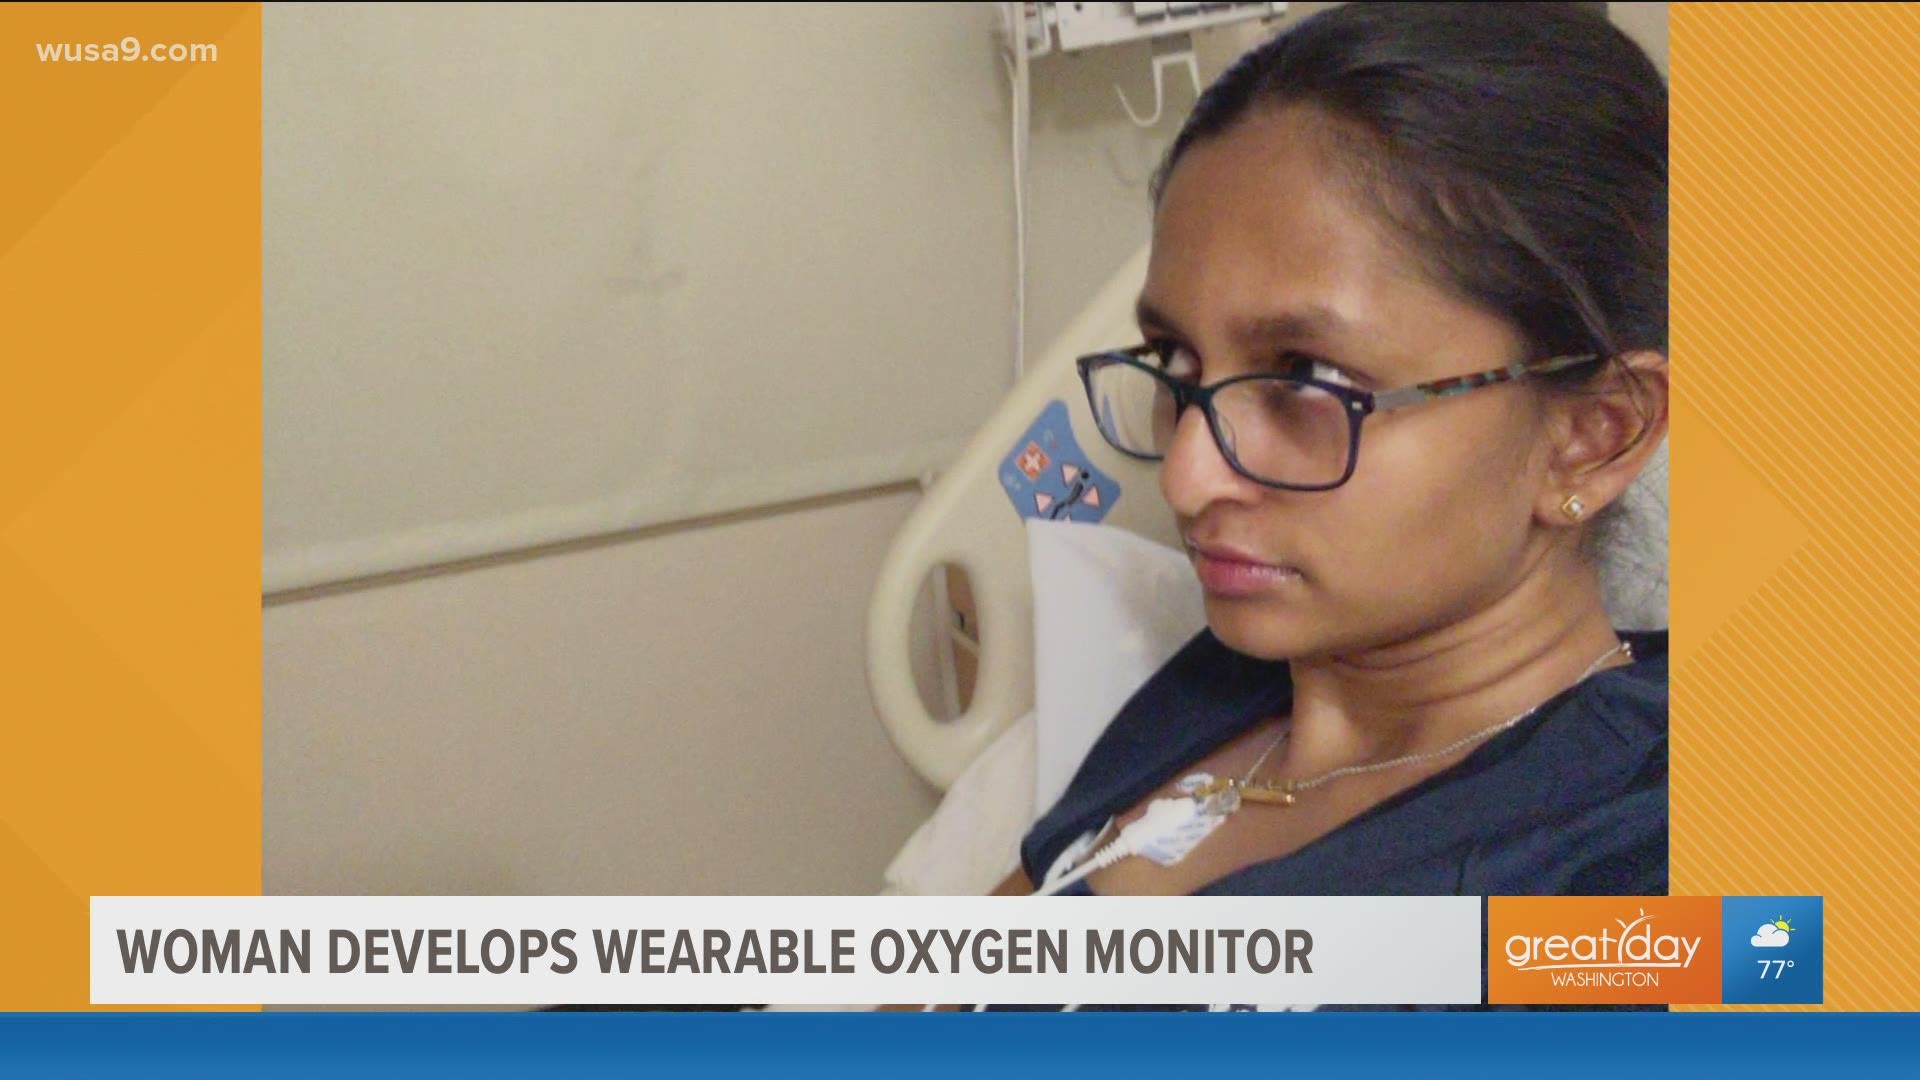 Shavin Fernando, Founder and CEO of Oxiwear shares how she developed a wearable oxigen monitor.